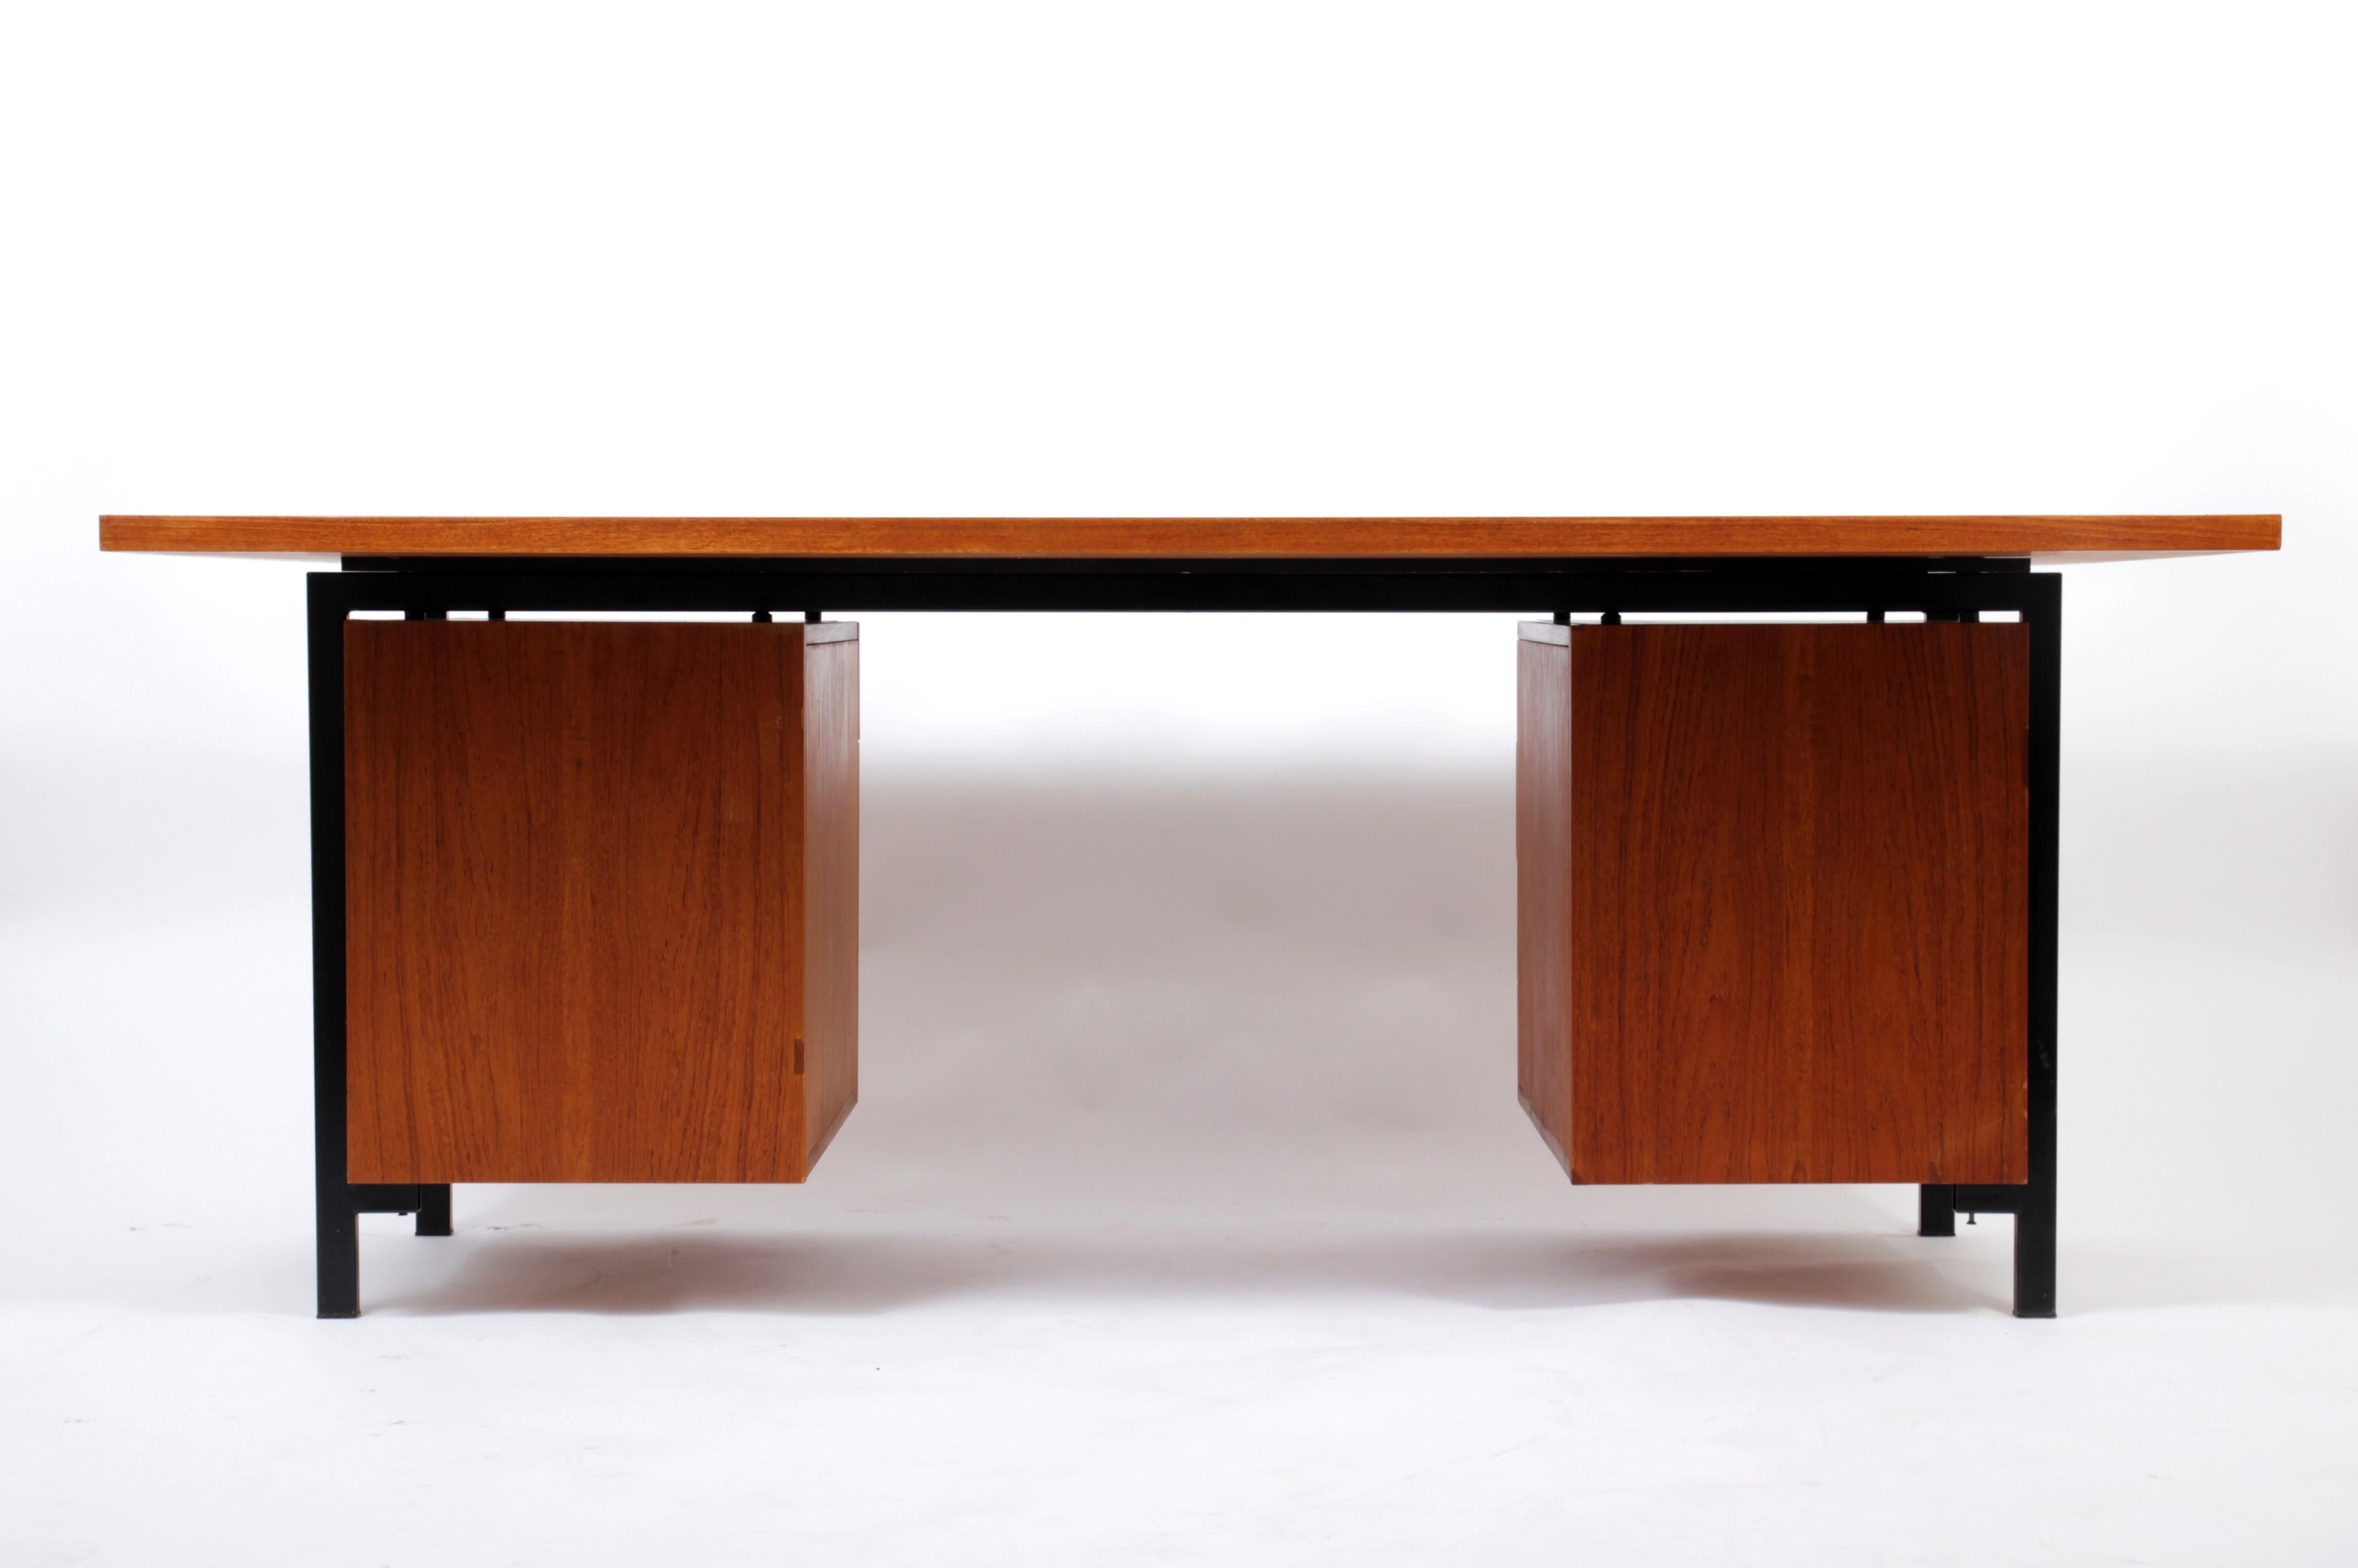 The desk, created from a Japanese inspiration and therefore part of the so-called Japanese series, is in perfect condition because all old layers of lacquer have been removed, giving the Teak wood life and depth again. The wood is treated with a